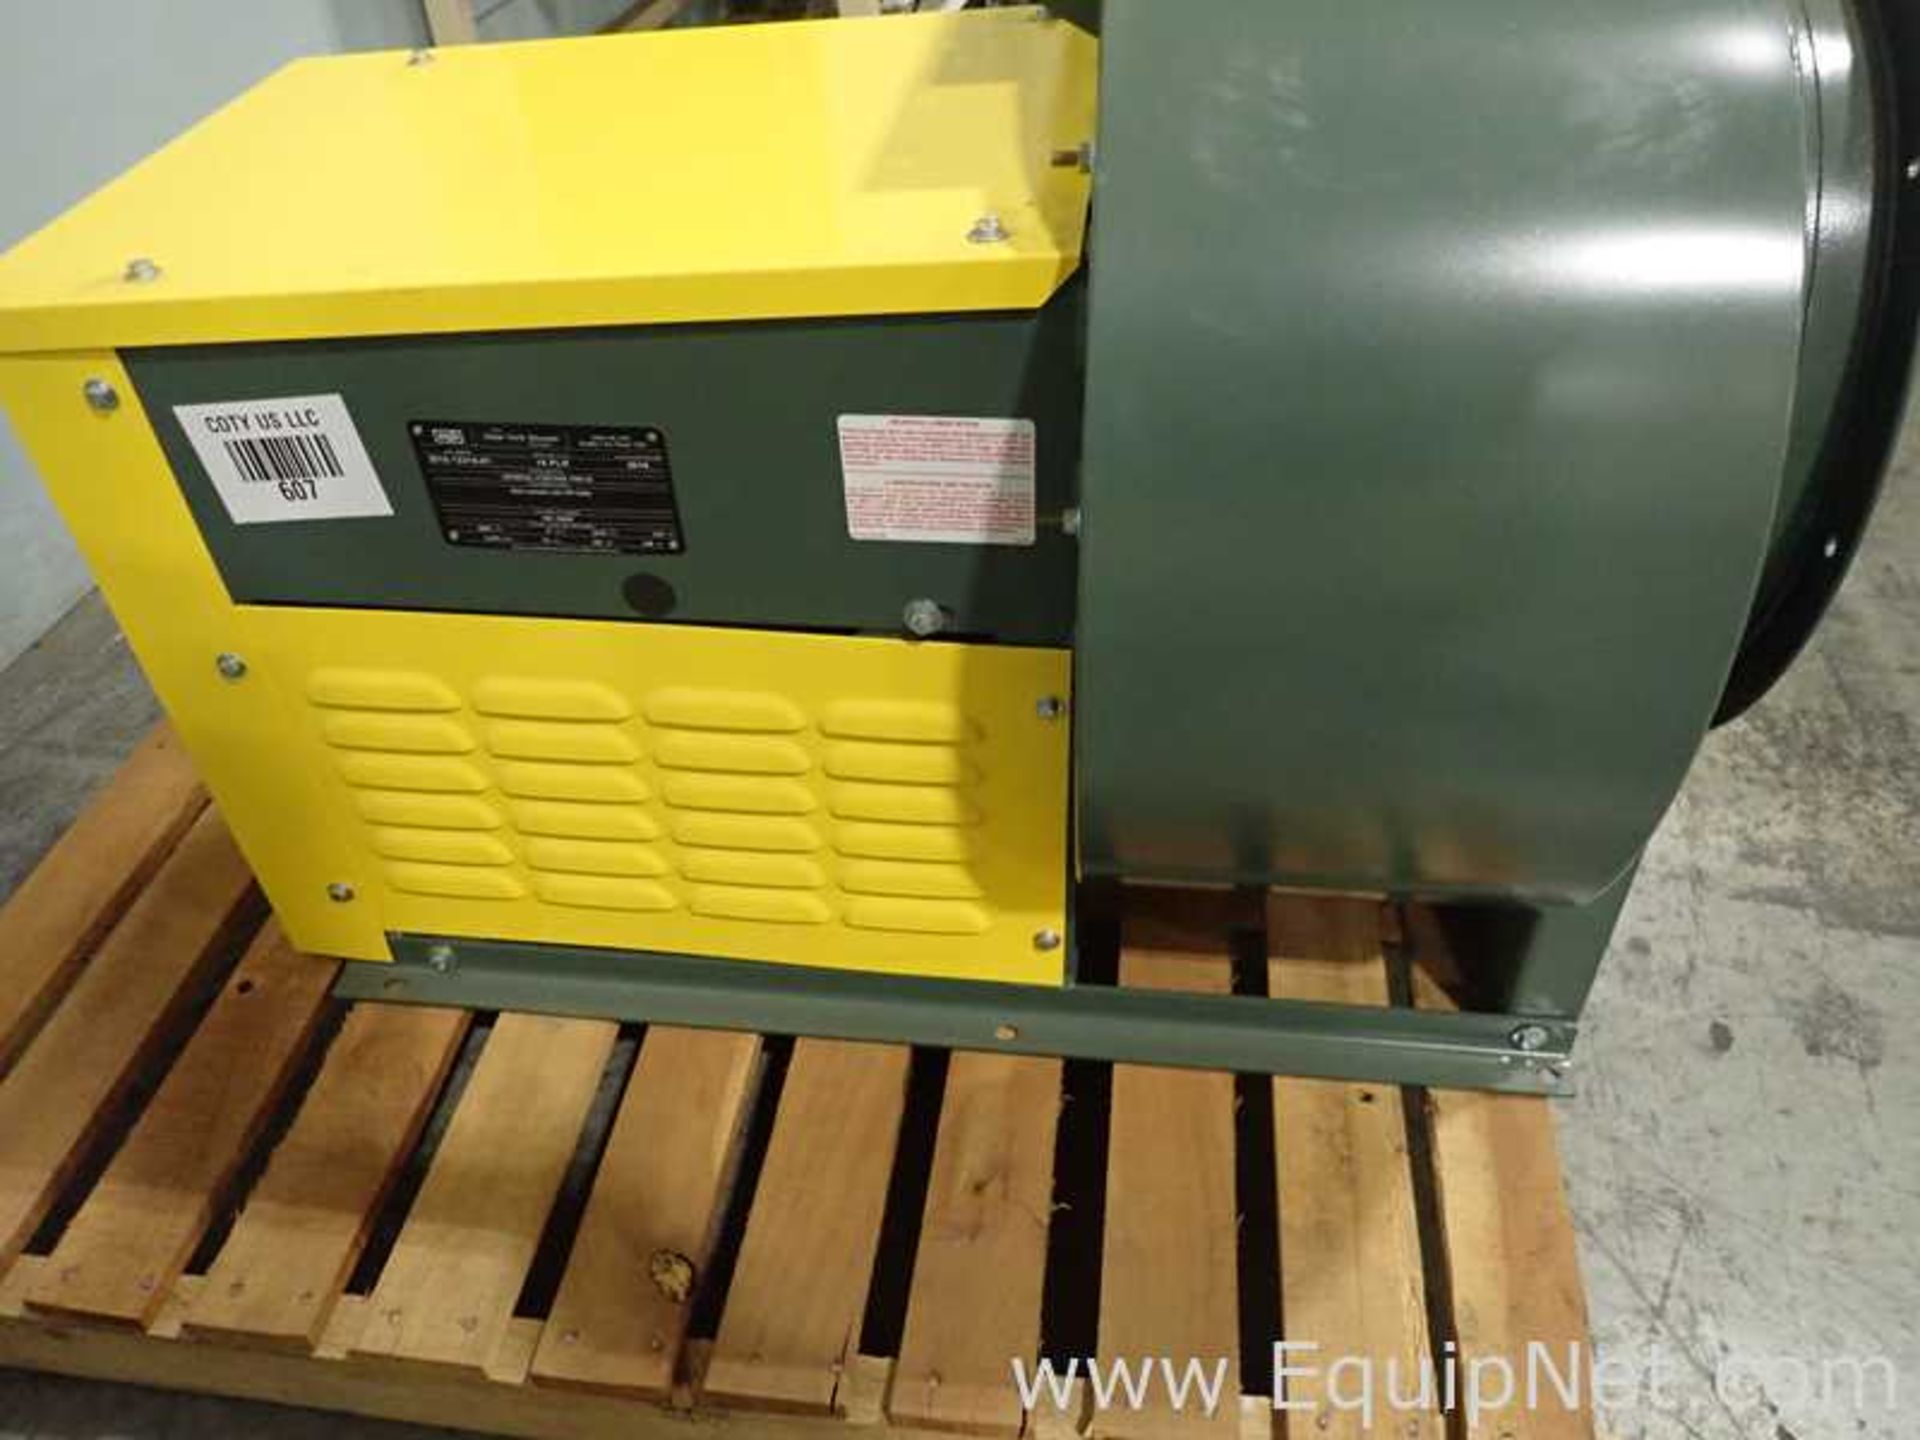 EQUIPNET LISTING #793272; REMOVAL COST: $25; DESCRIPTION: Unused New York Blower General Purpose - Image 4 of 8